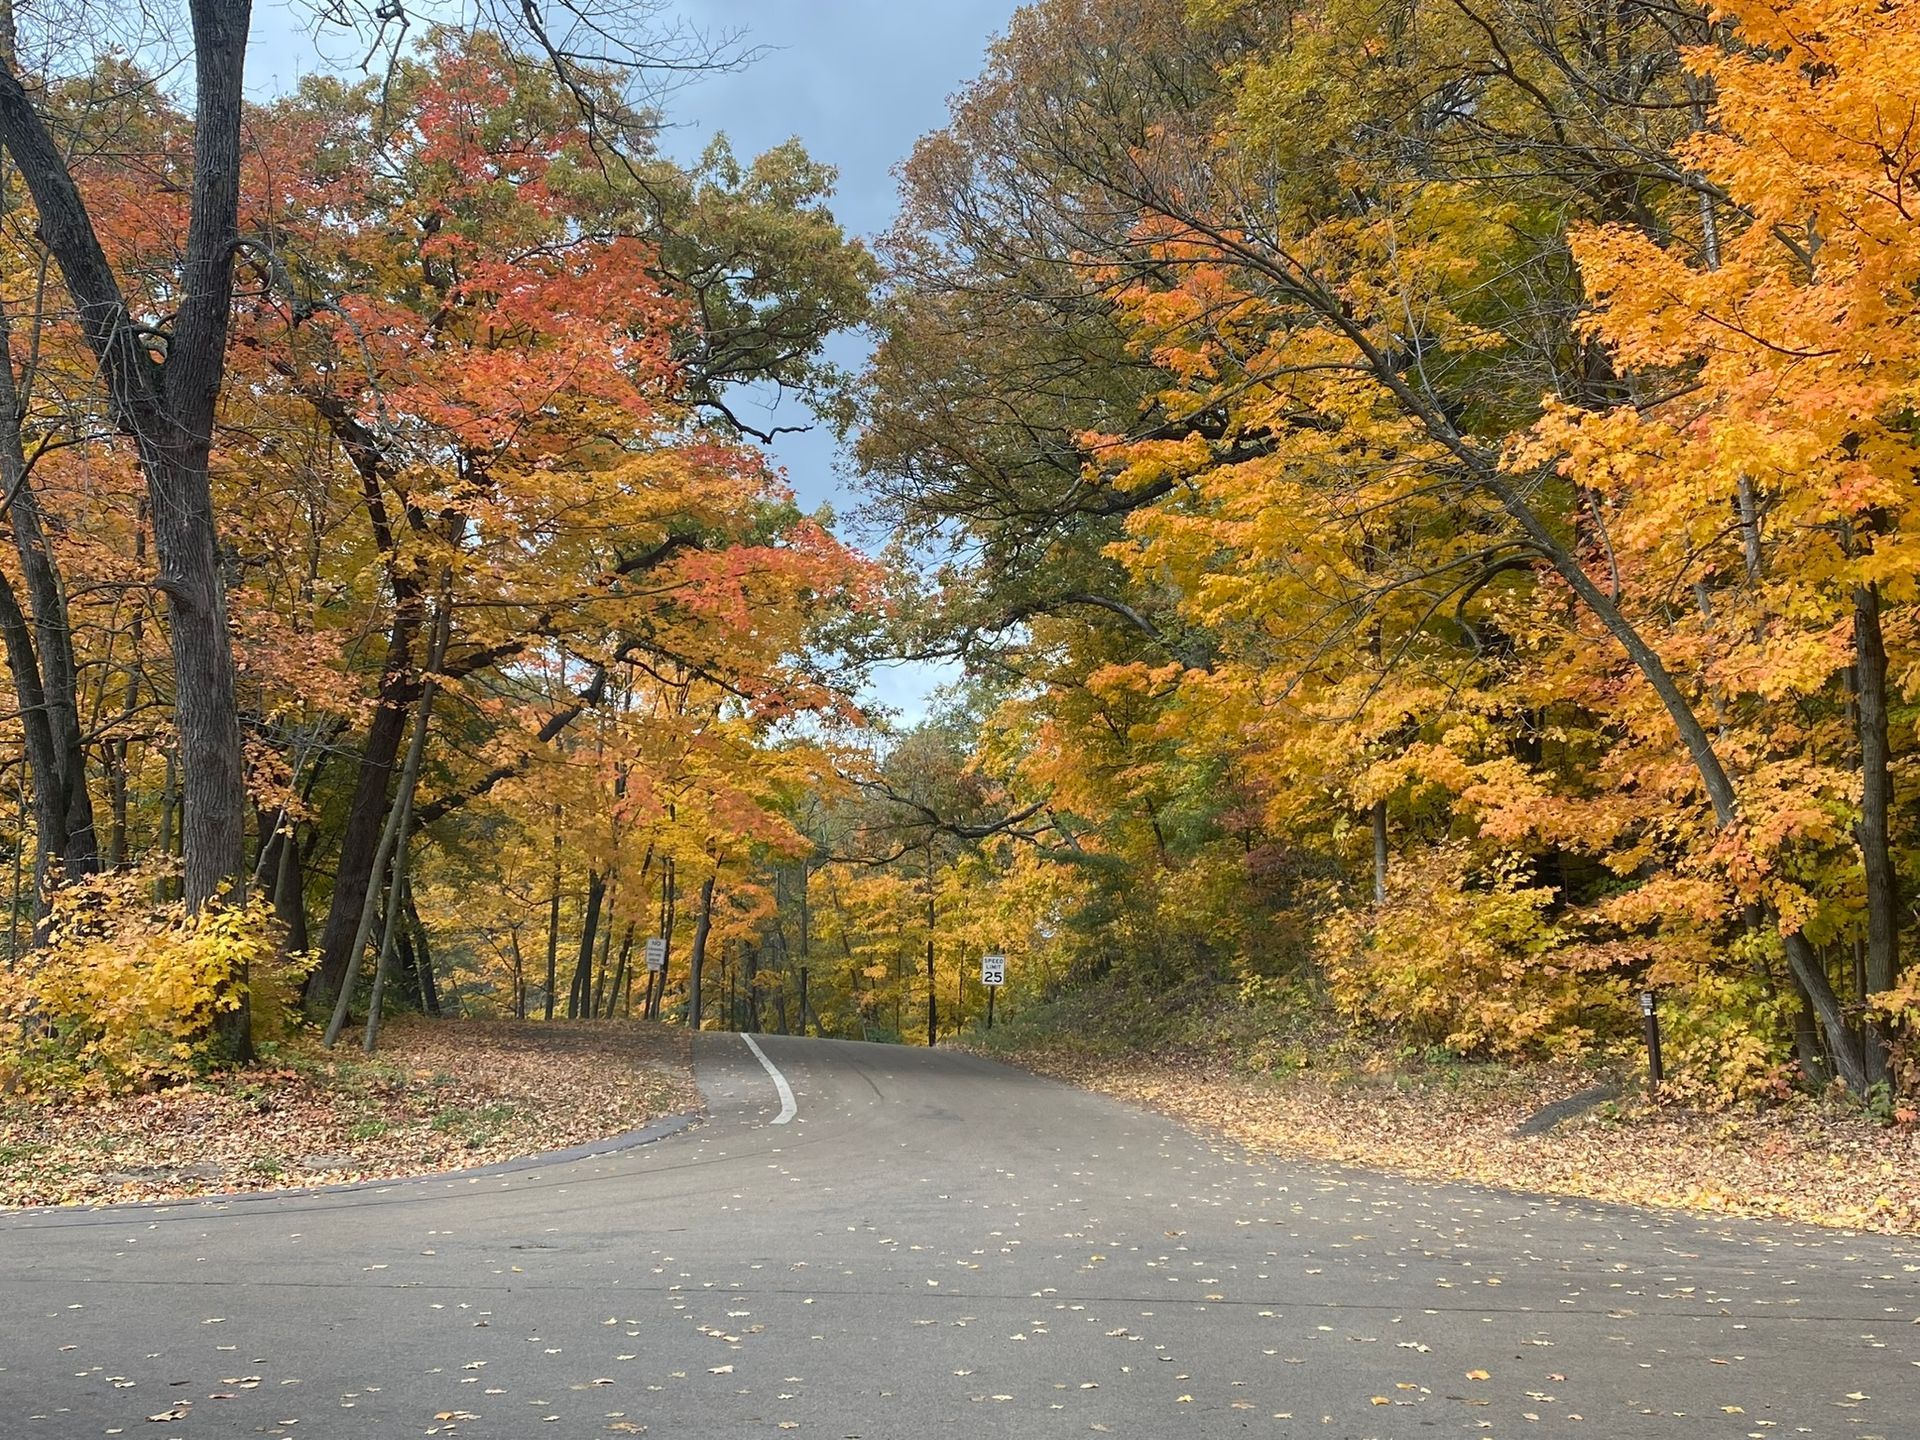 A road surrounded by trees with leaves on the ground